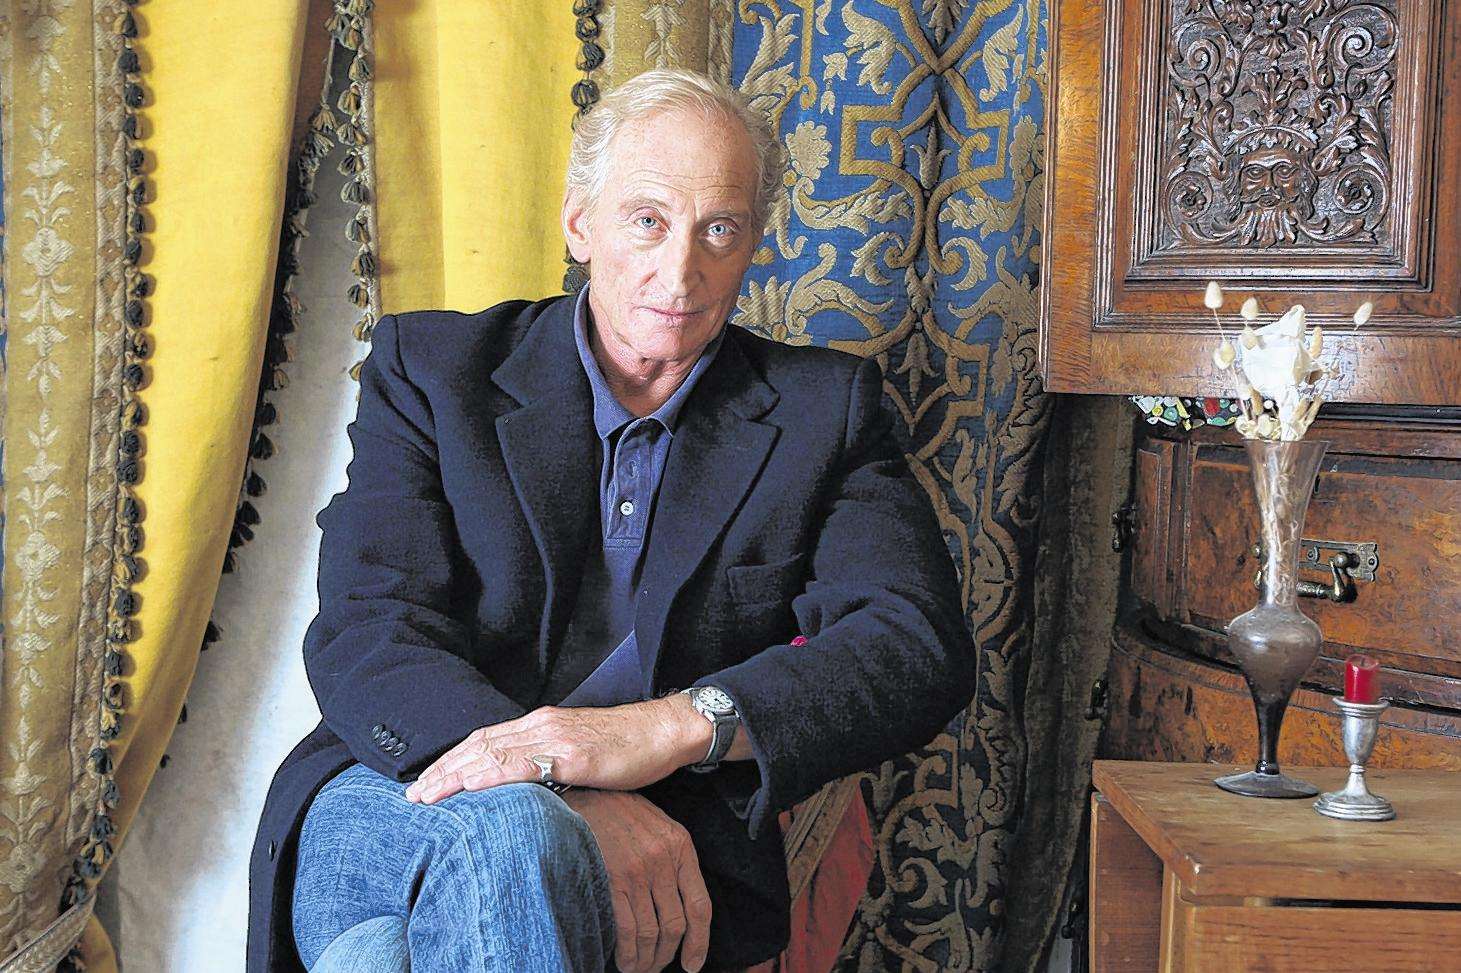 Actor, Charles Dance, will narrate the hour-long film